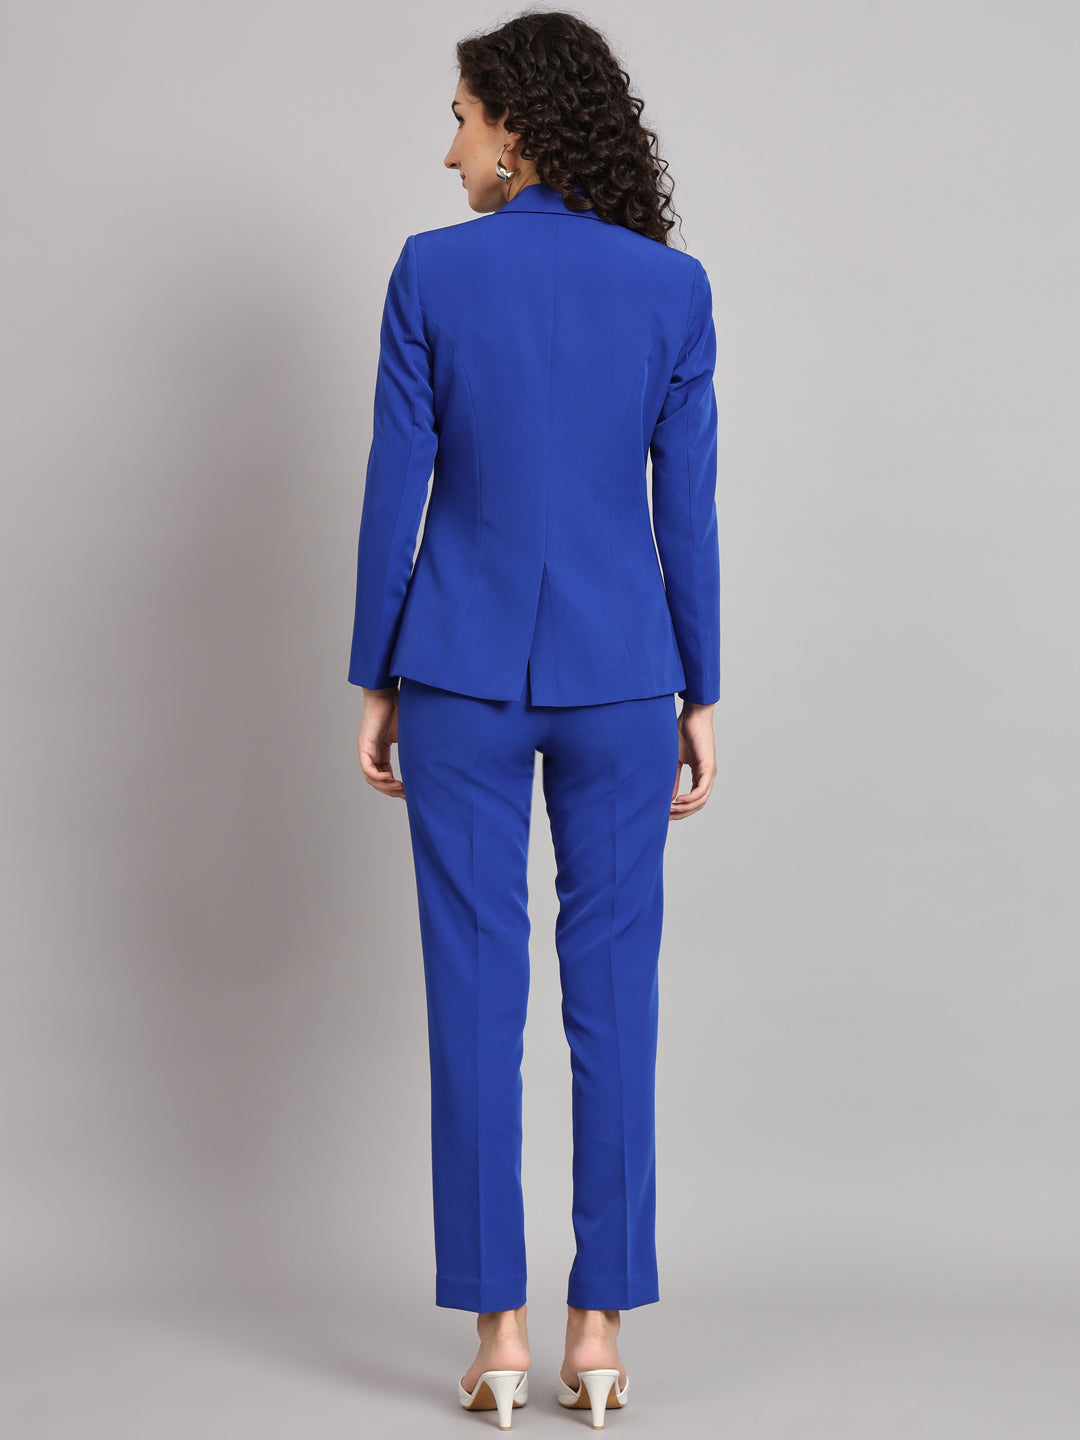 Ink Blue Polyester Notch Collar Stretch Pant Suit